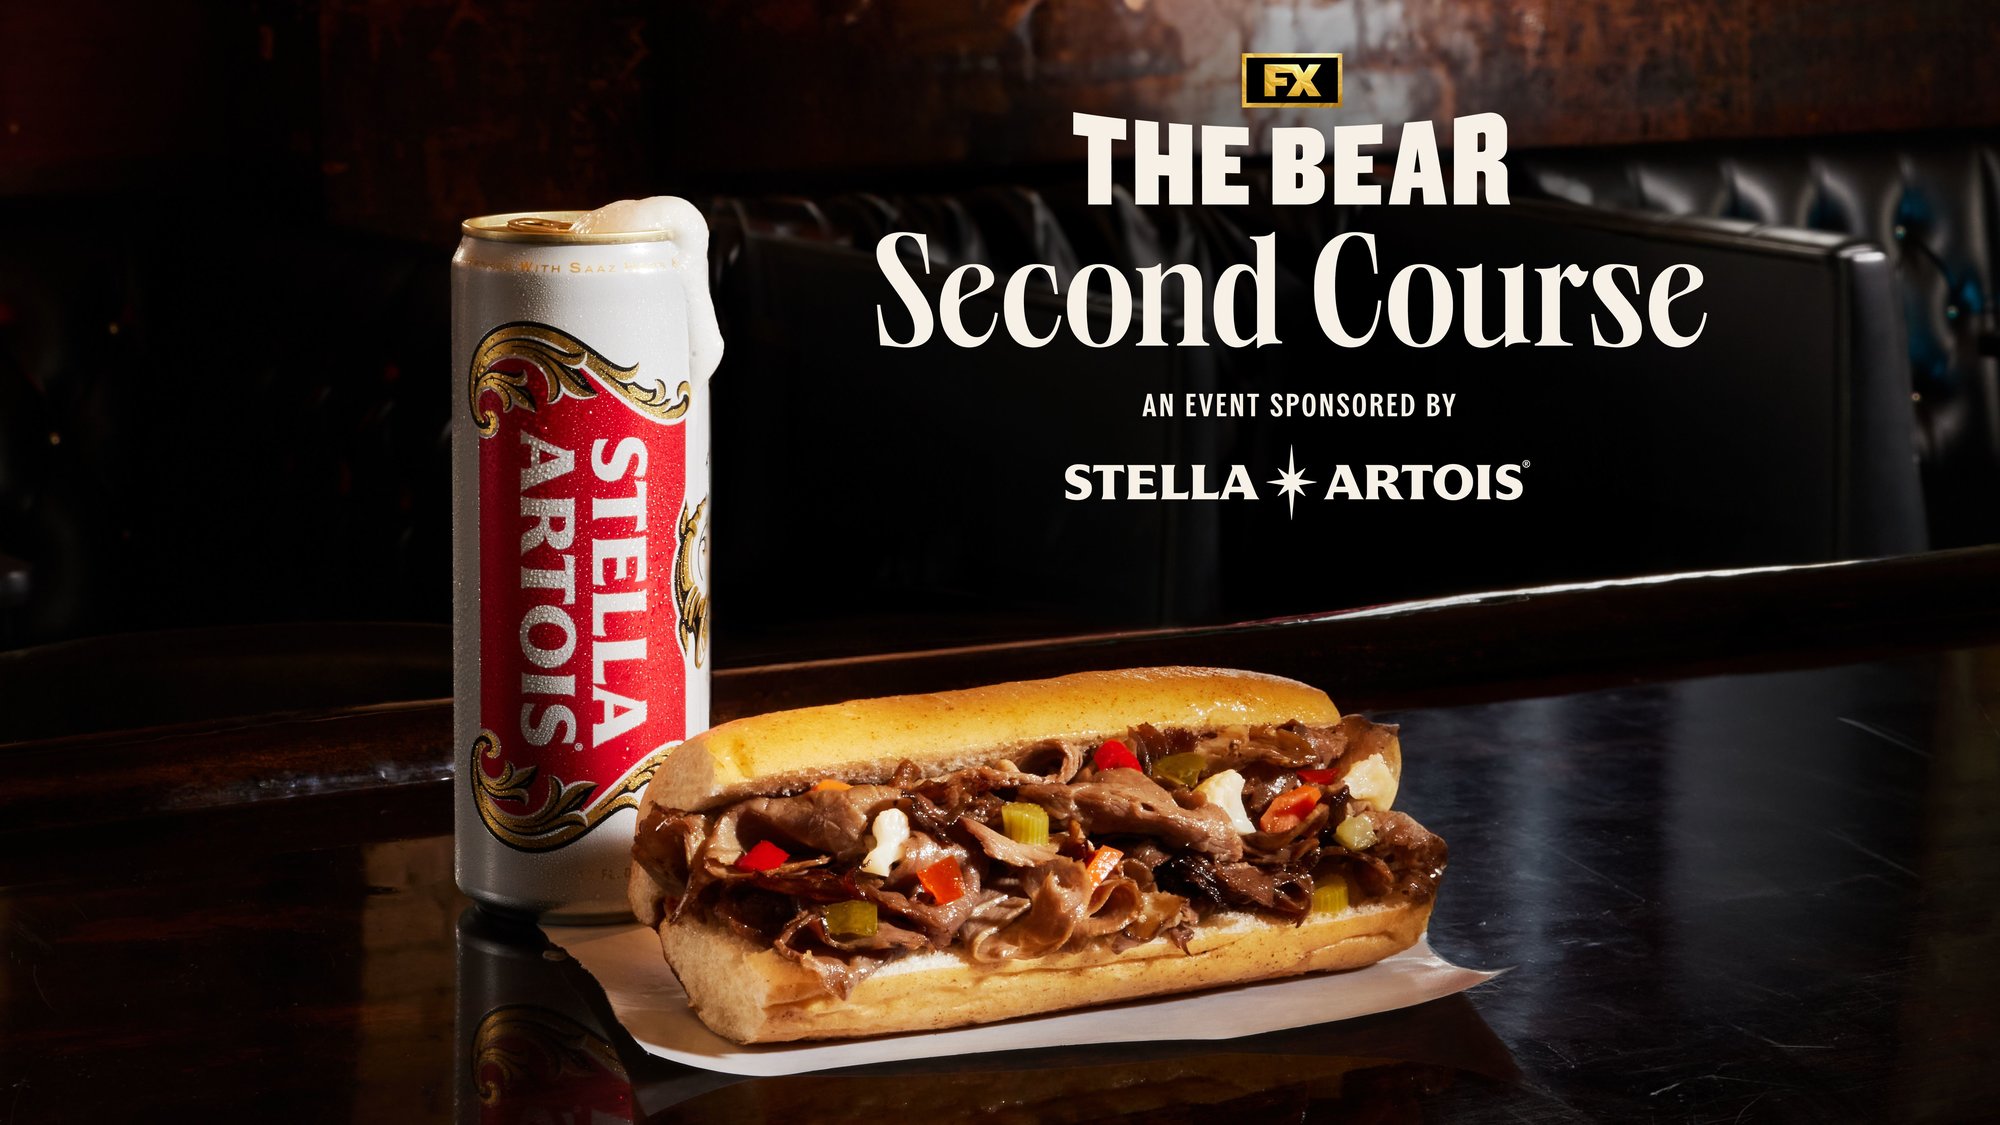 Stella Artois Launches Collaboration with FX's The Bear